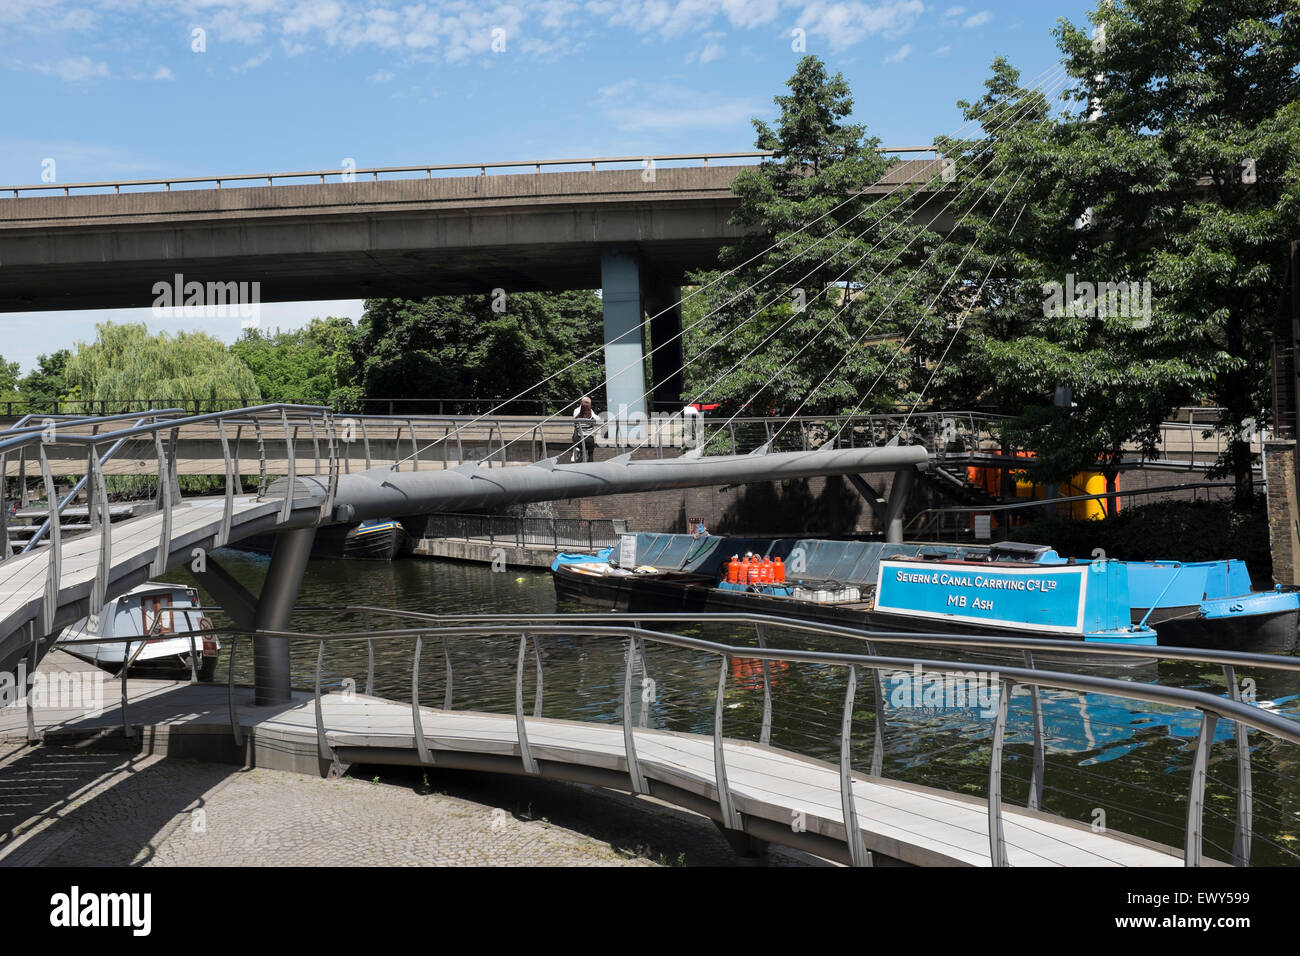 General view of bridges crossing the Grand Union Canal at the Paddington Basin, London, UK Stock Photo